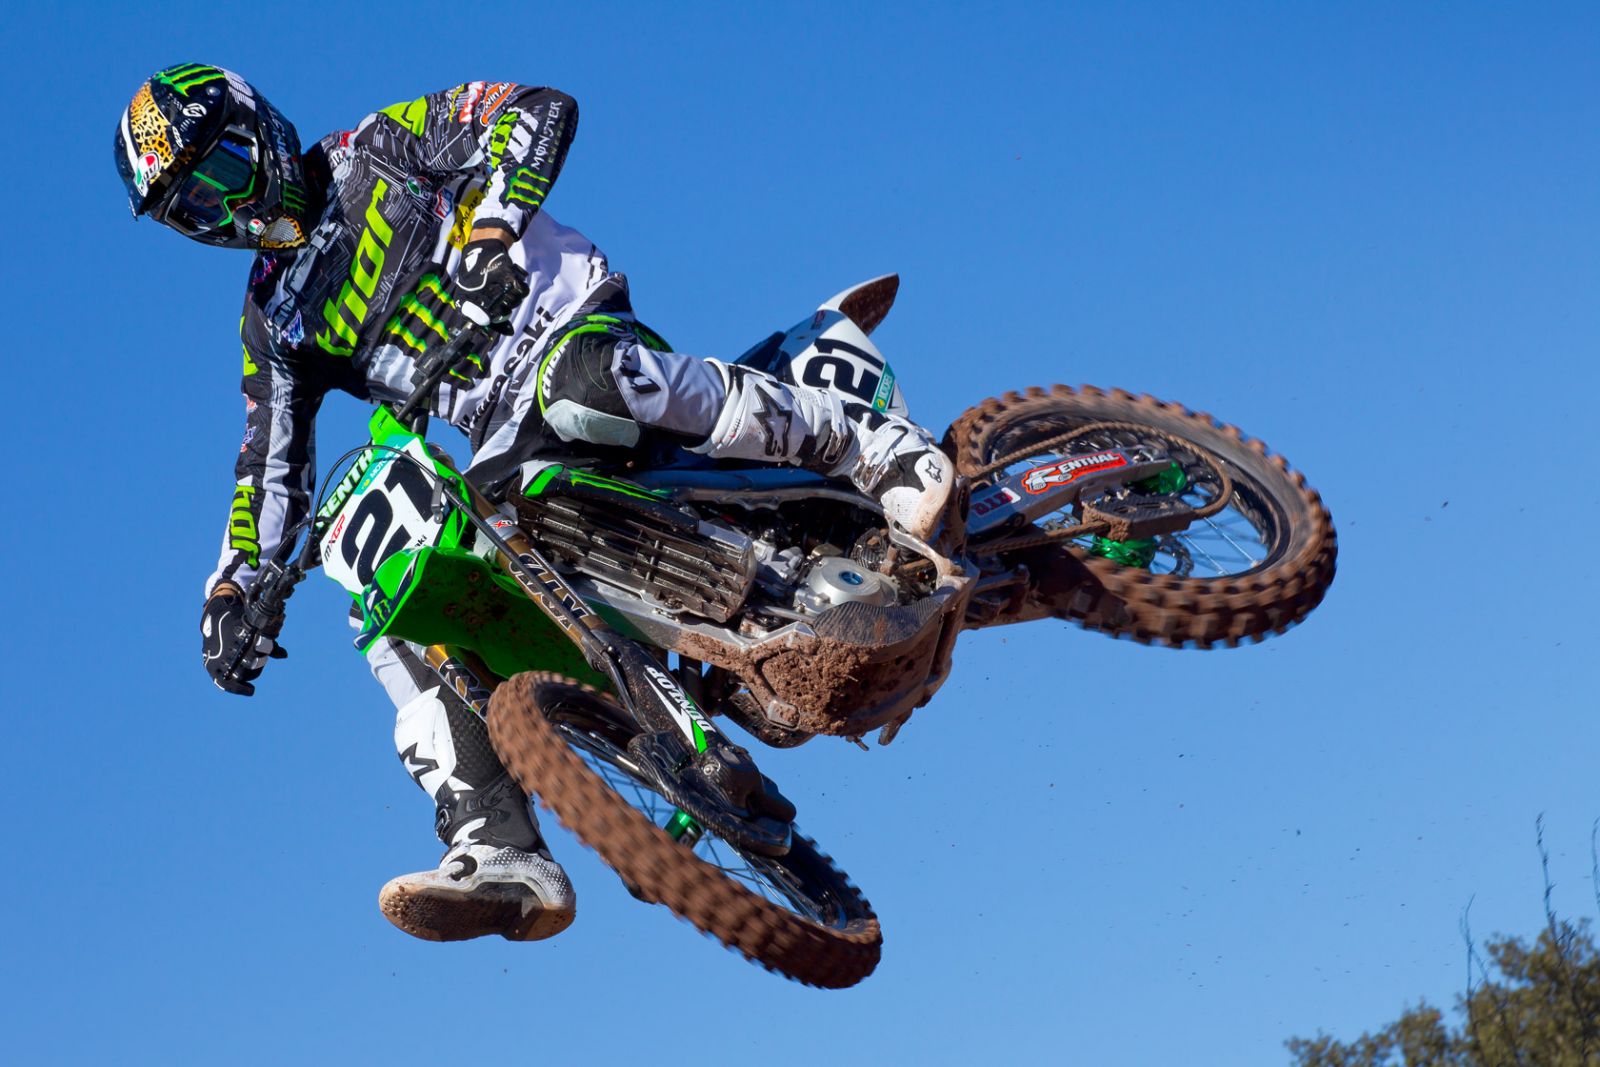 Can Gautier bring home the bacon for France at the MXON?